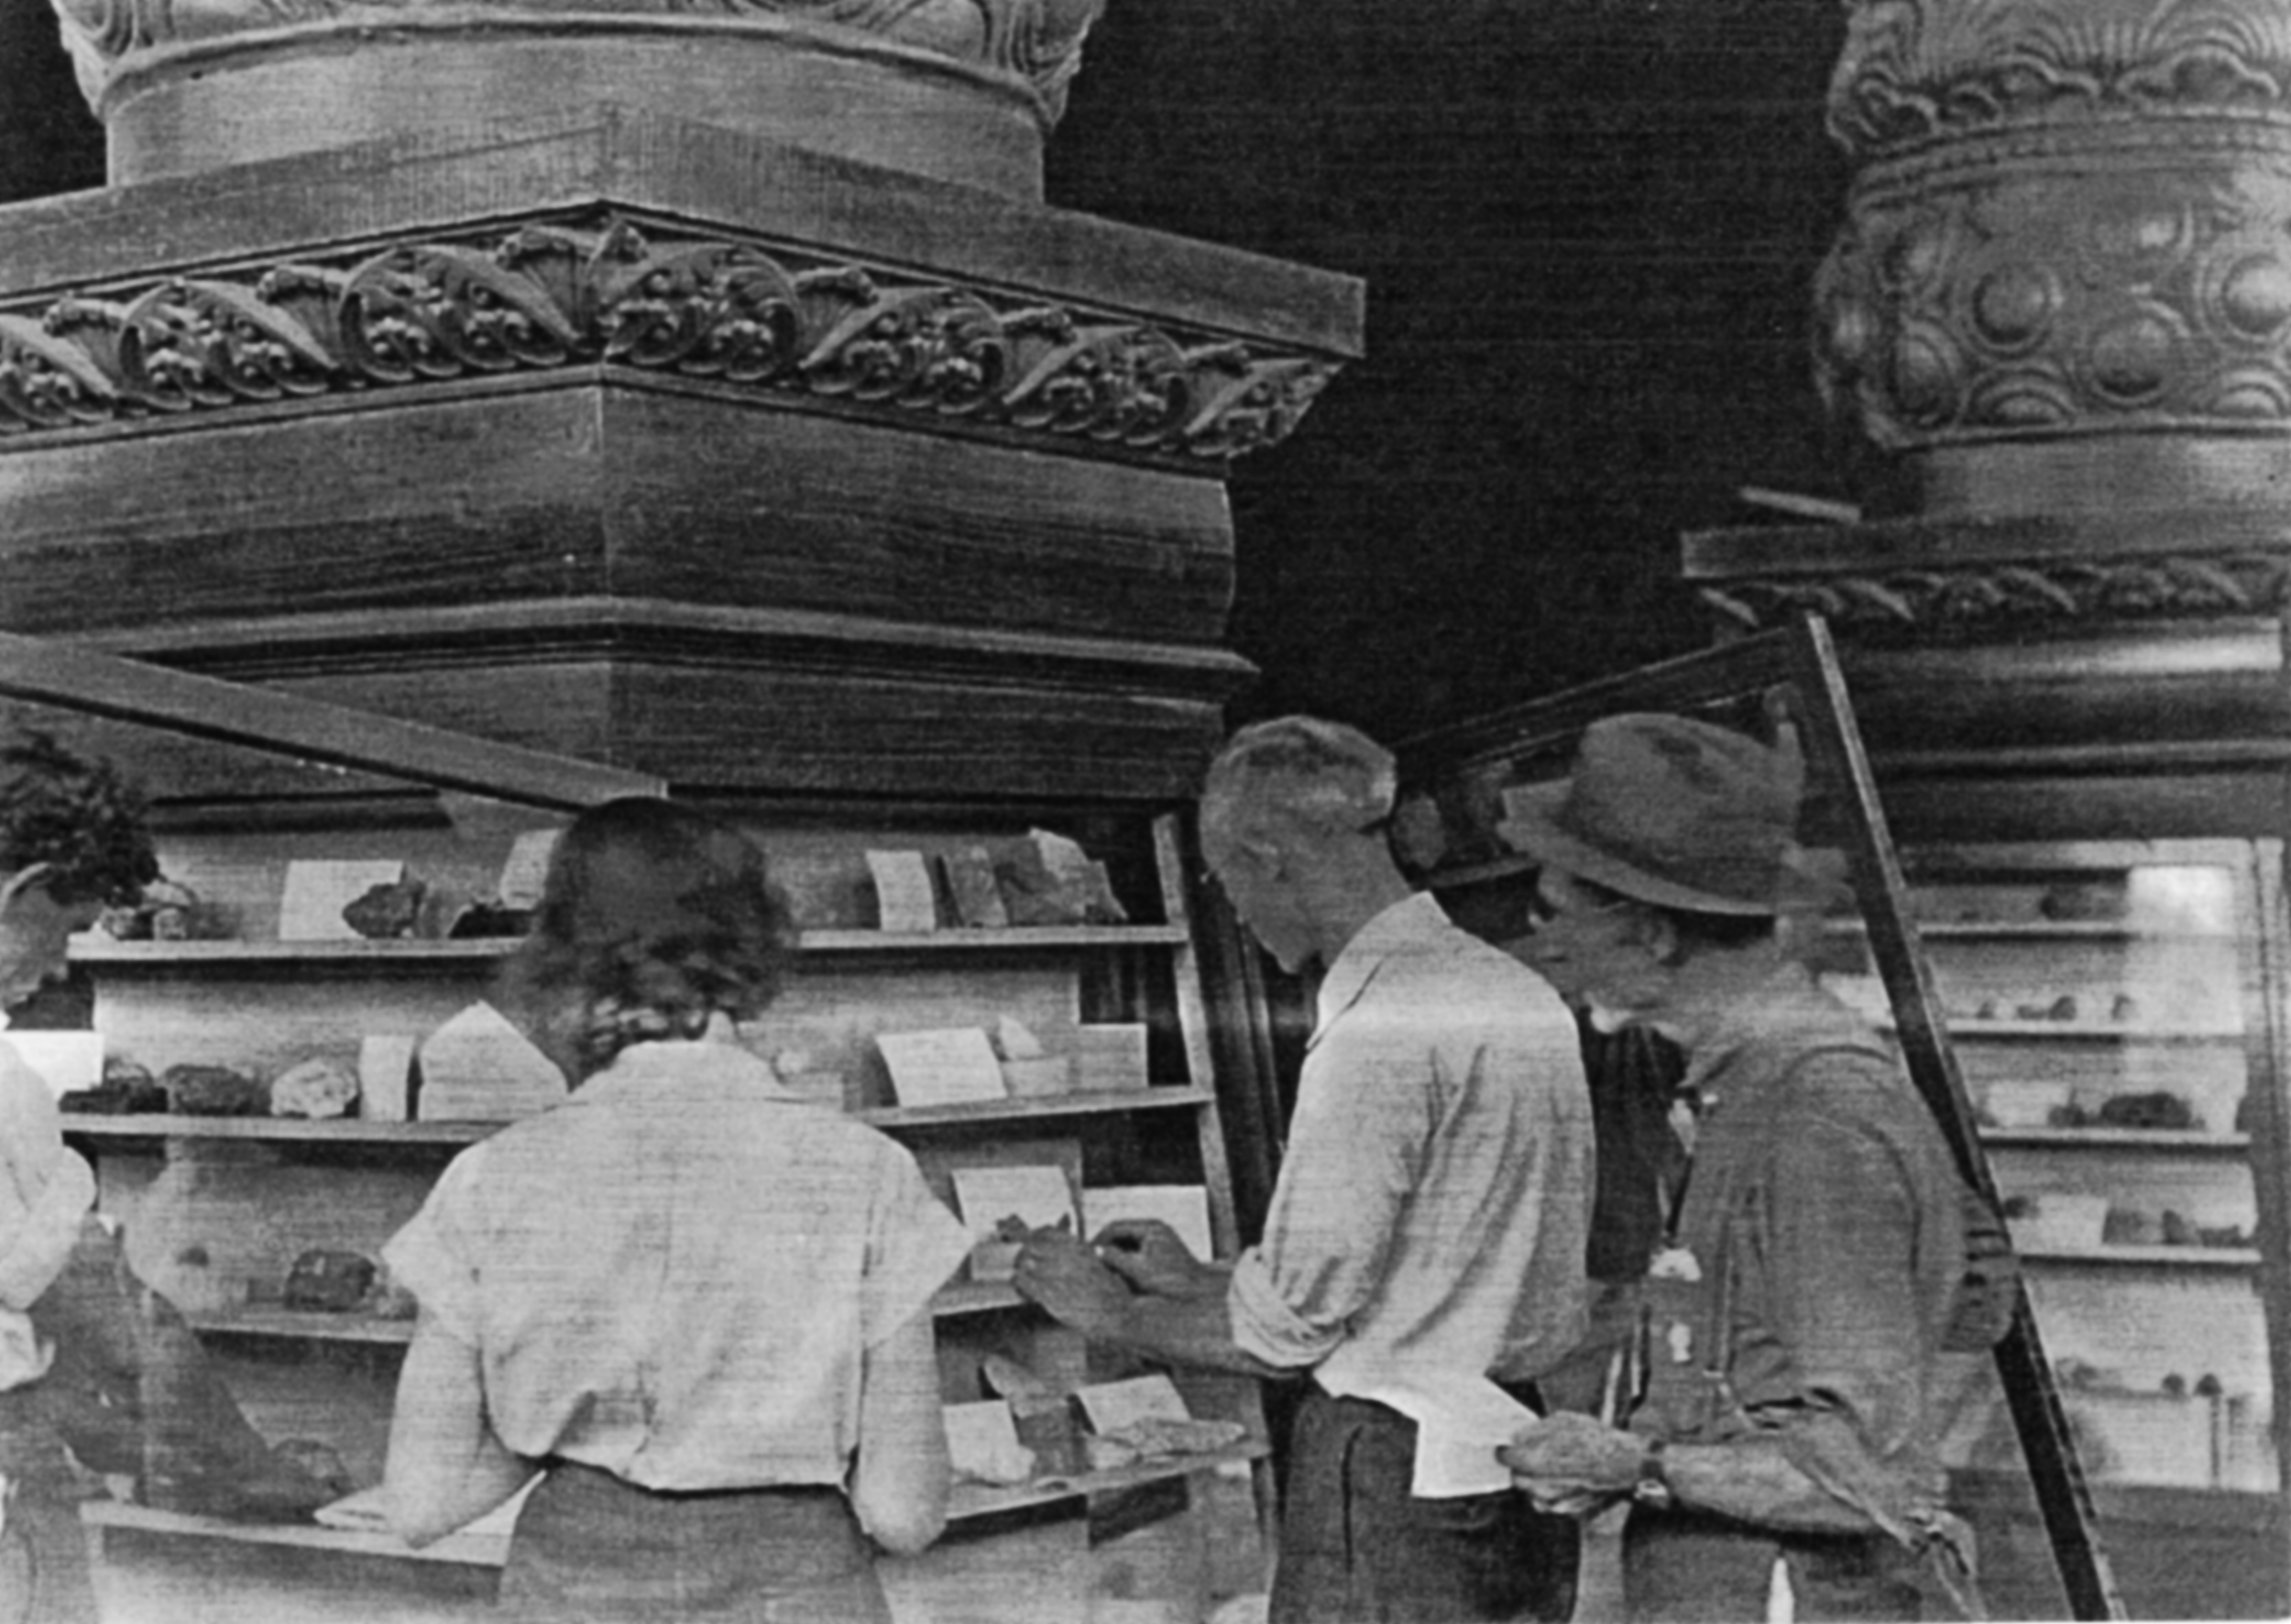 Individuals examining the minerals in the display cases at the Mineral Palace.